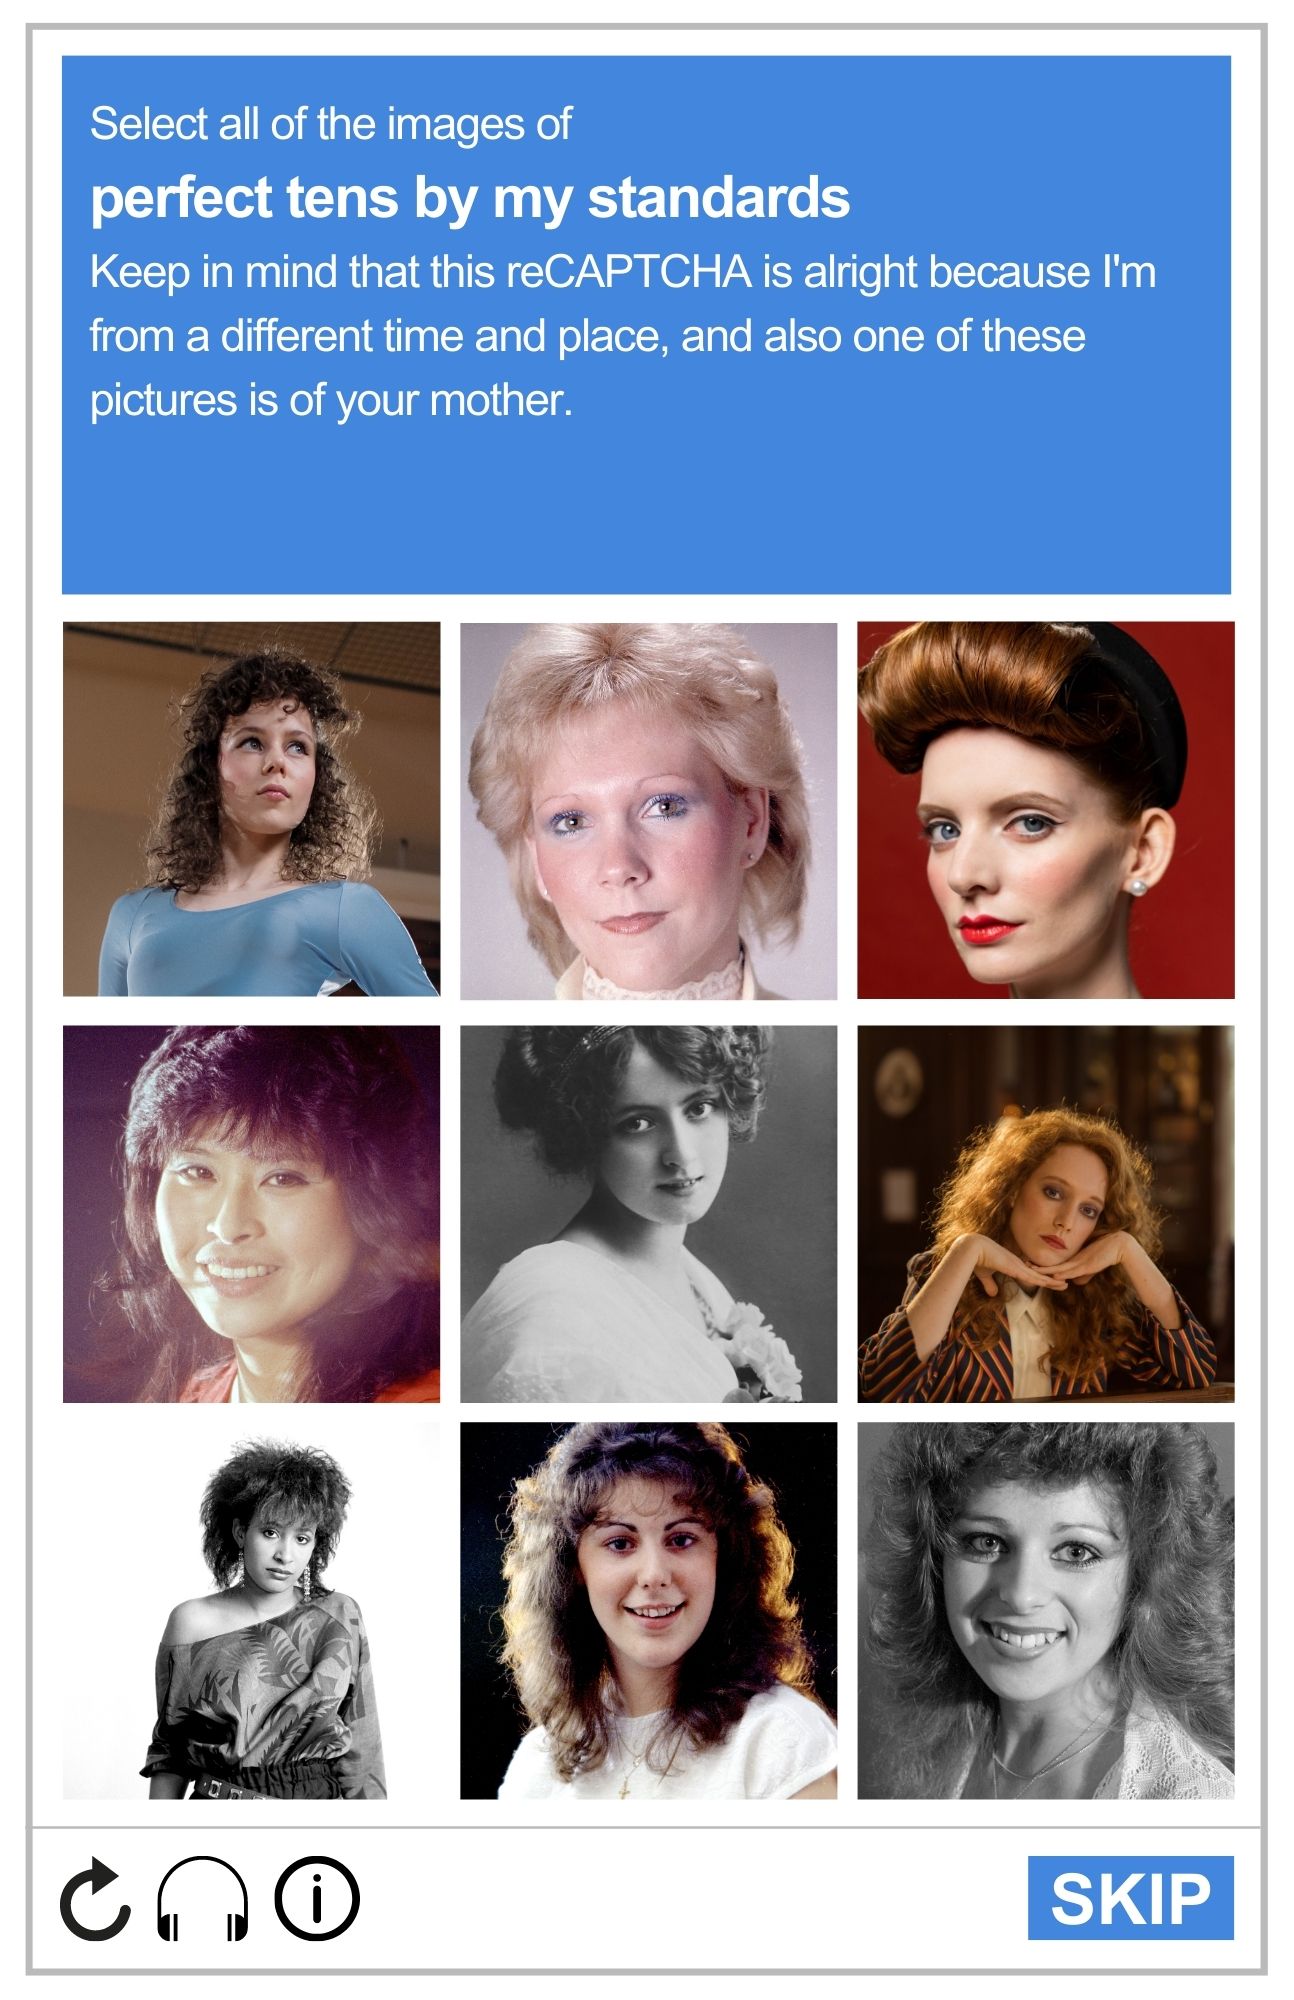 Image of a reCAPTCHA board, featuring nine different woman. Most of the photos seem to have been taken in the 1980s. The prompt reads: Select all the images of perfect tens by my standards. Keep in mind that this reCAPTCHA is alright because I'm from a different time and place, and also one of these pictures is of your mother.